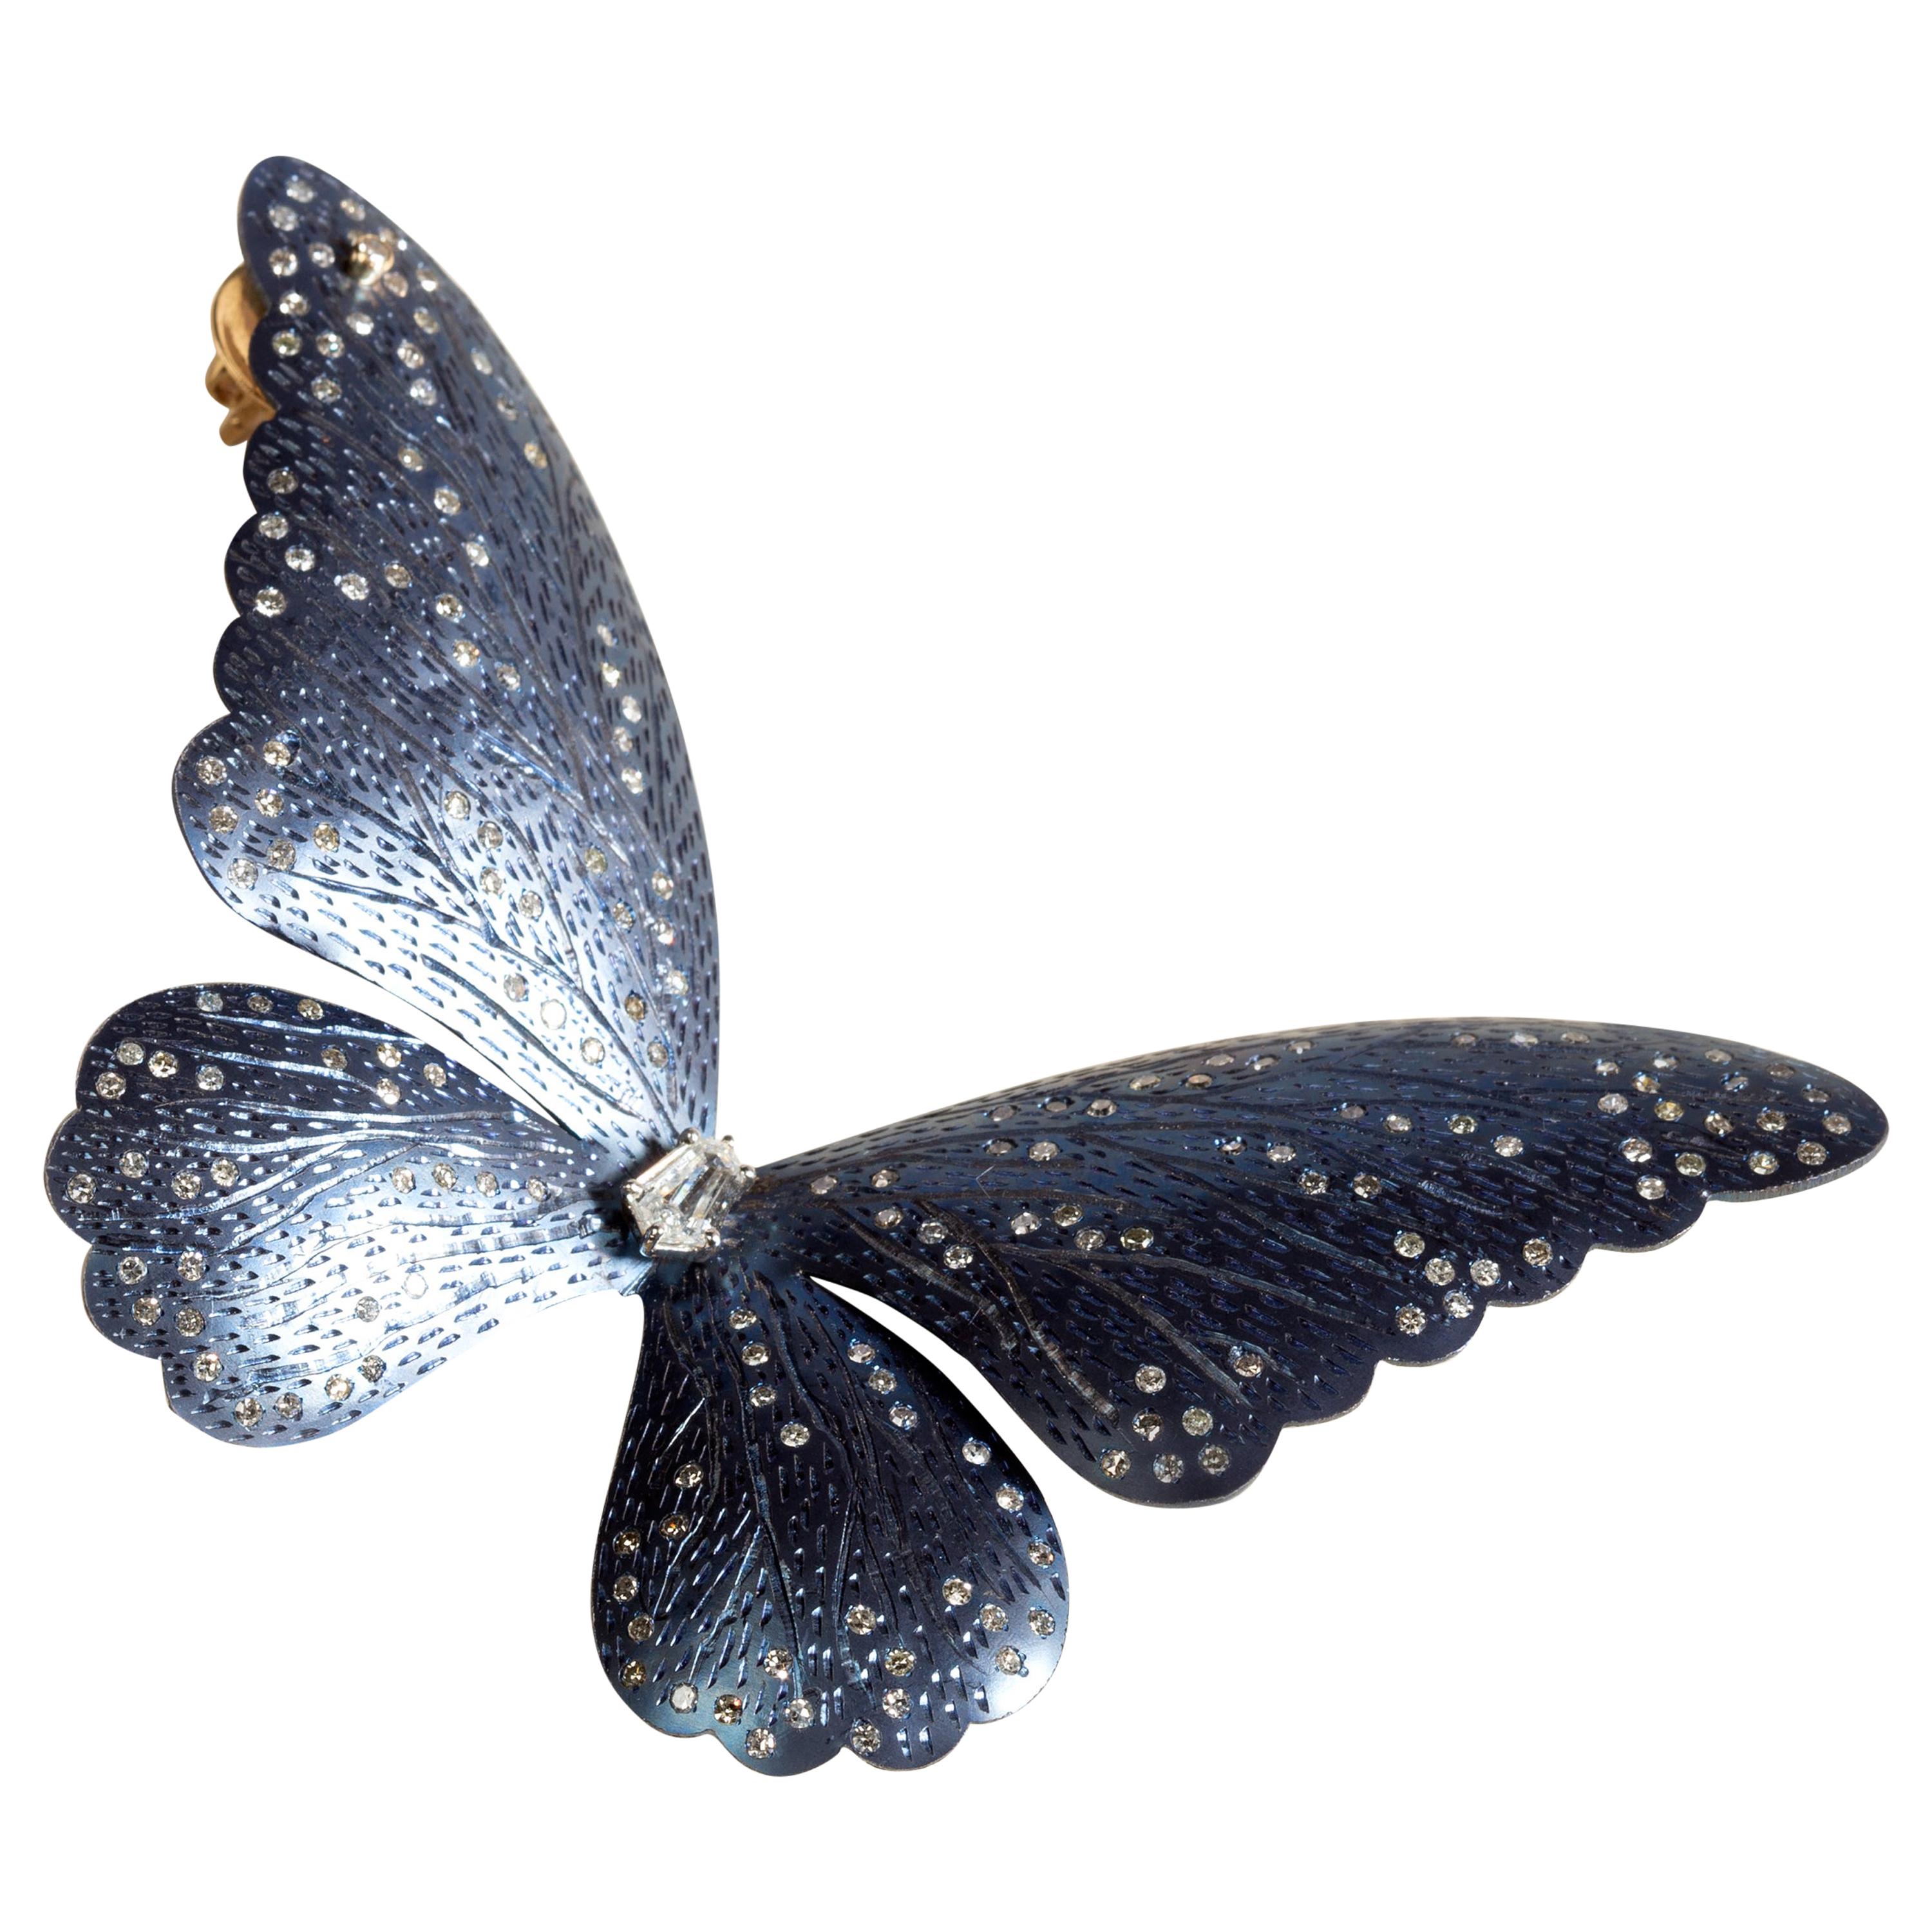 Blue Titanium Butterfly Half-Earring Set with Diamonds and a Kite Solitaire